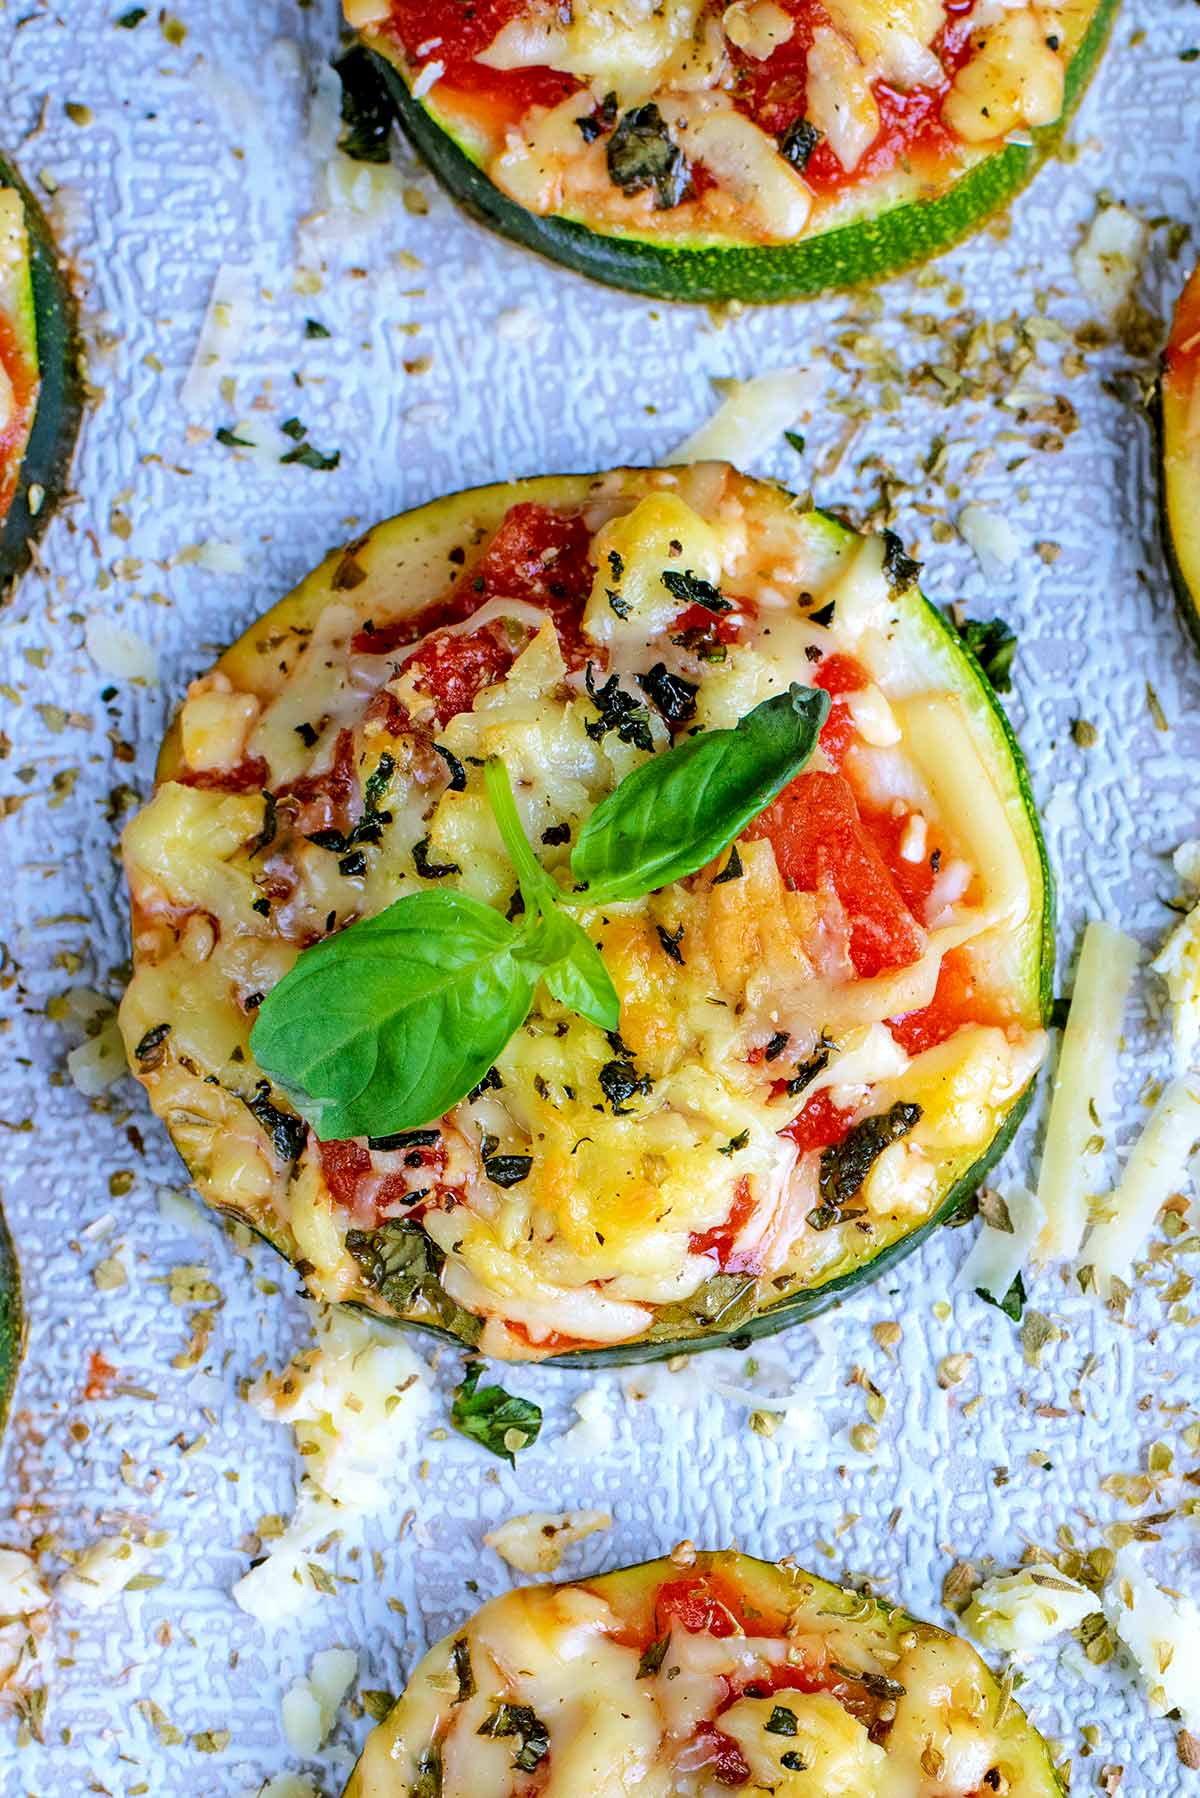 A large slice of courgette topped with chopped tomato, melted cheese and basil leaves.